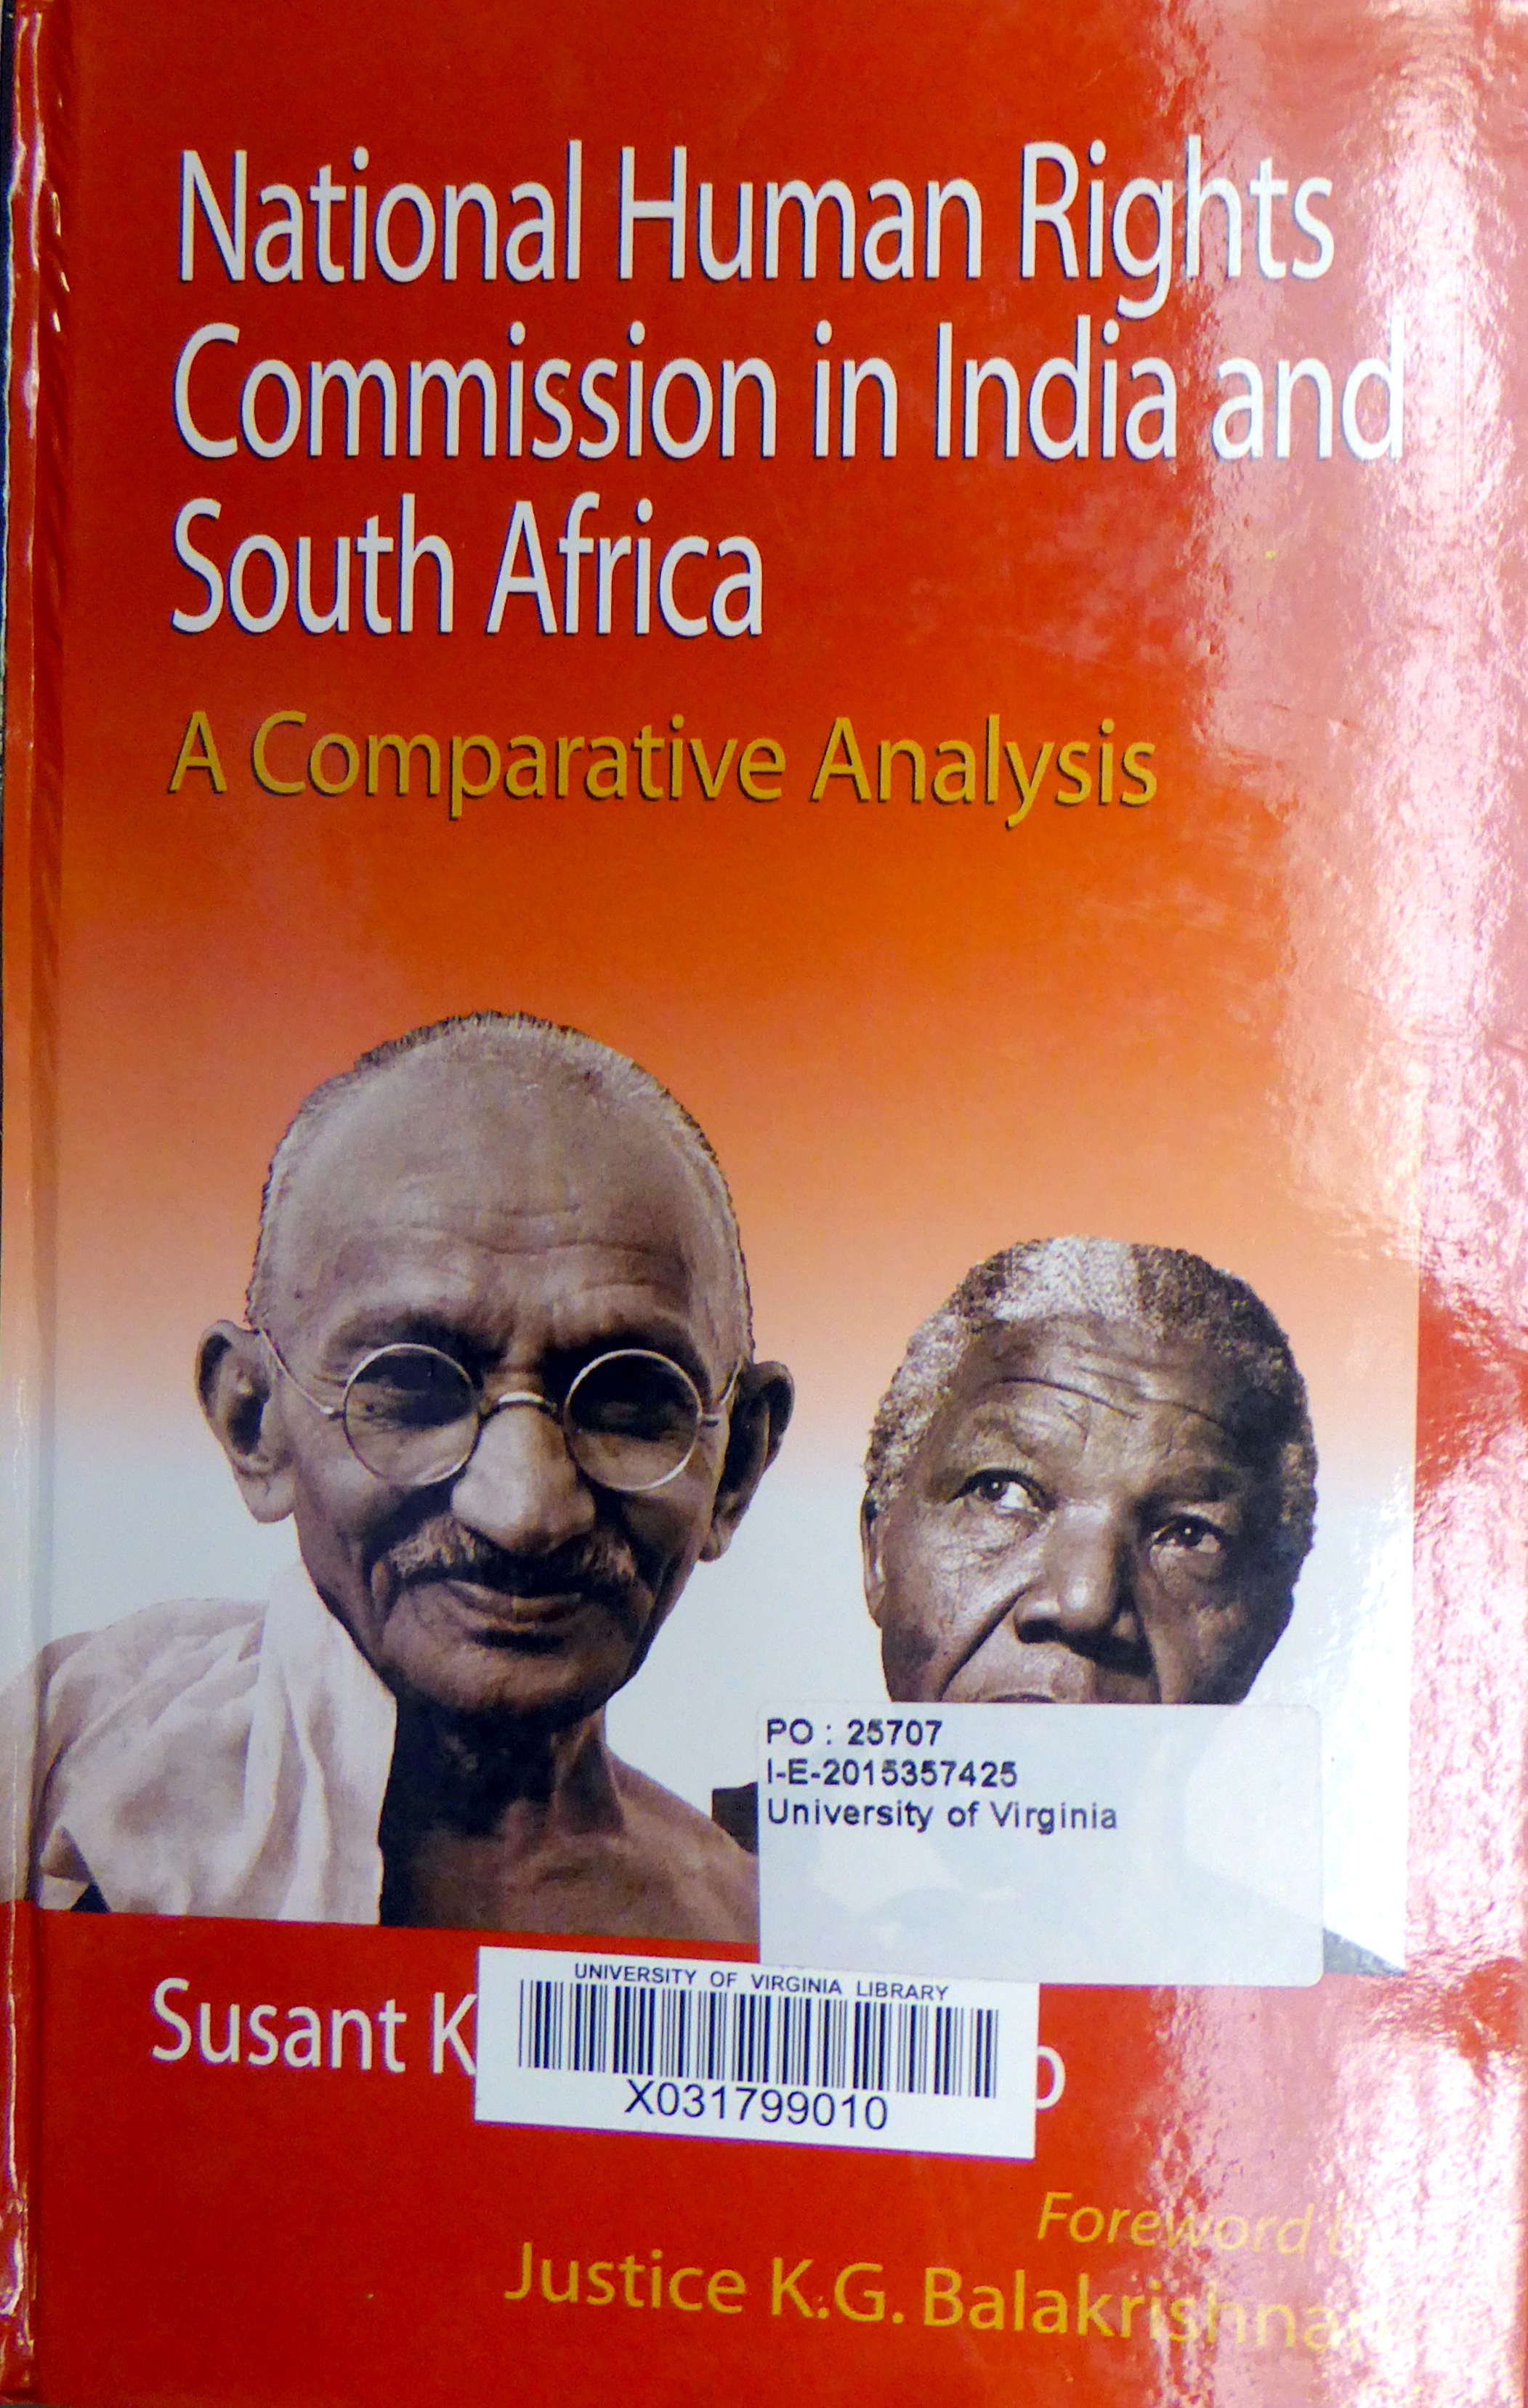 Human Rights Commission in India and South Africa